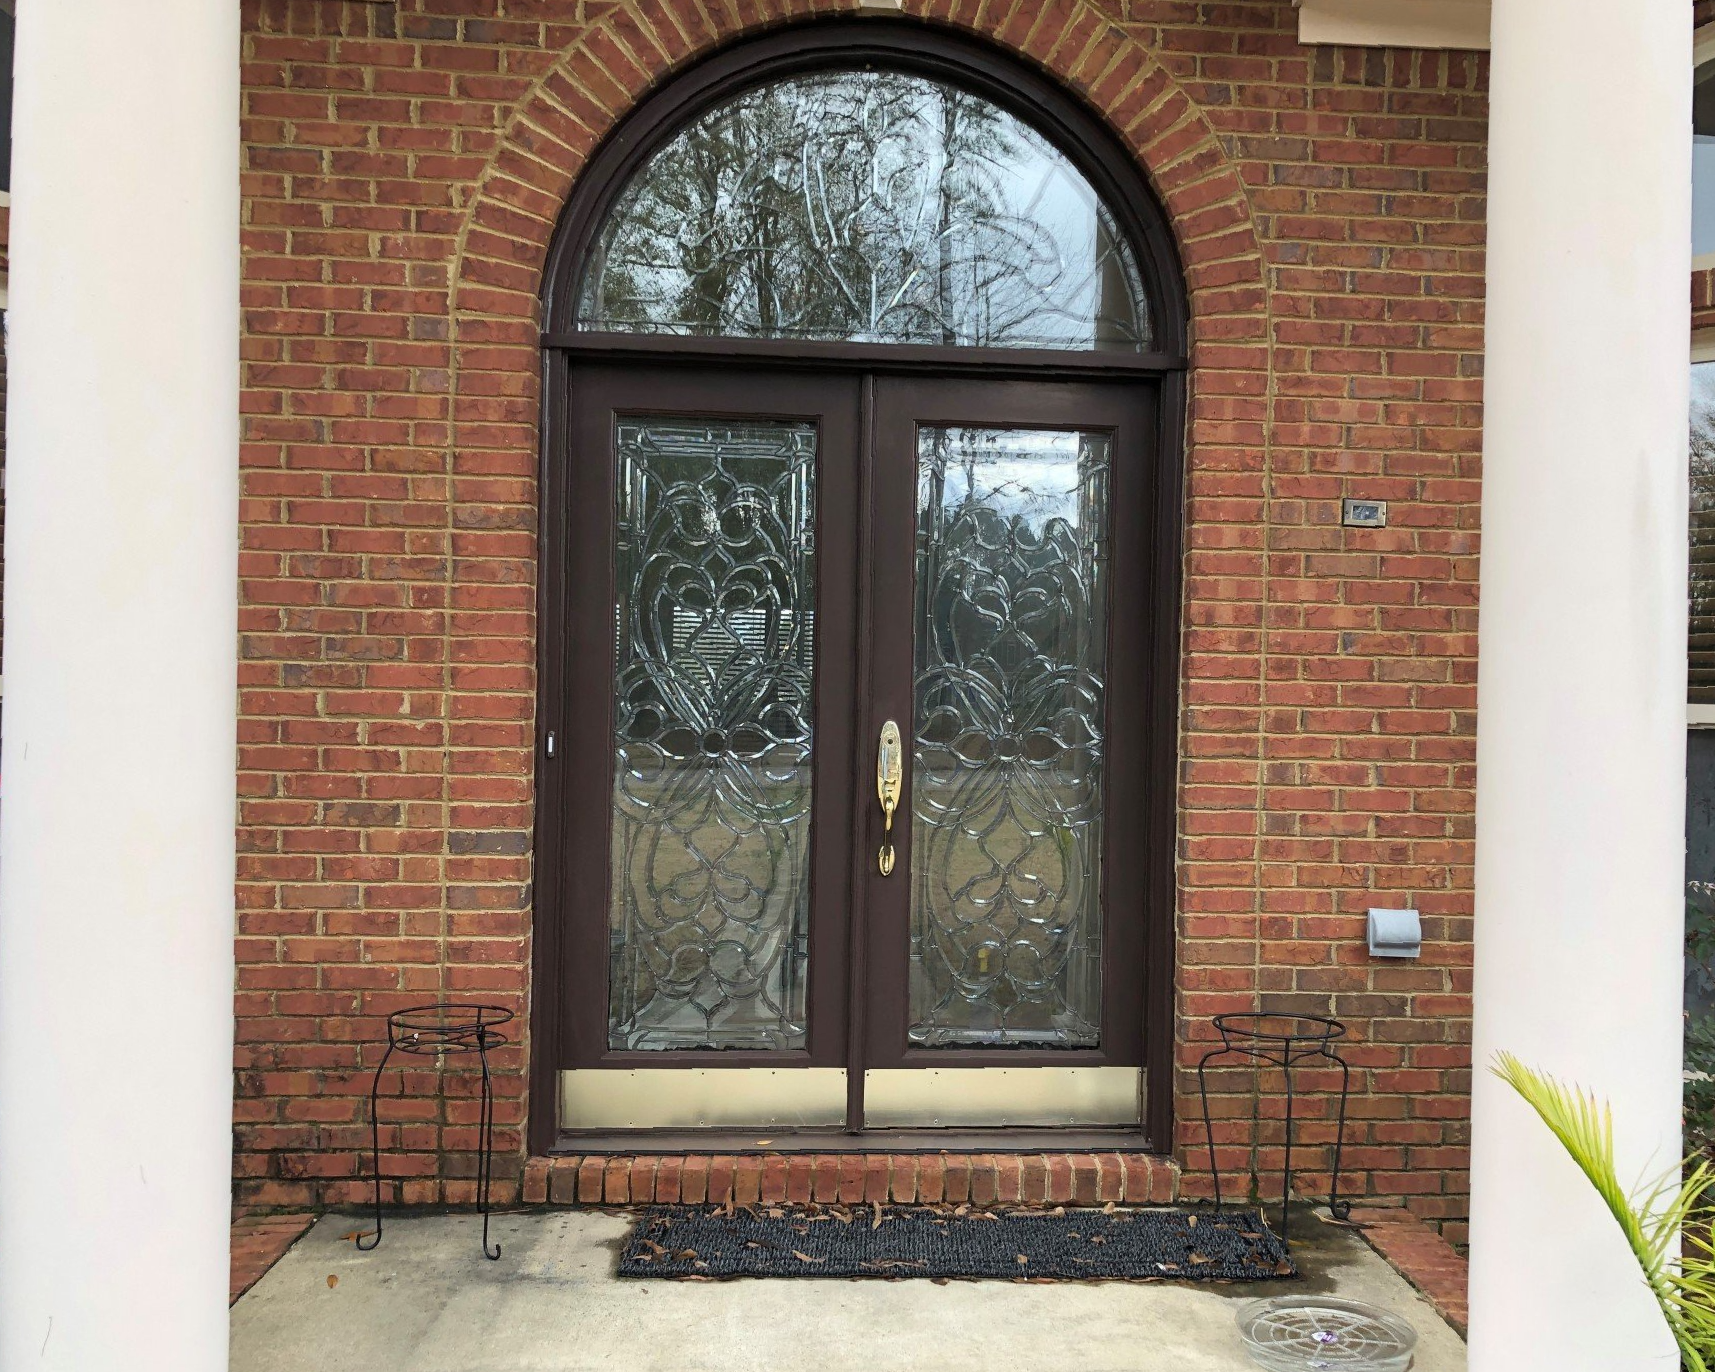 Professional residential window tinting service - home windows and glass doors tinted on January 4, 2019